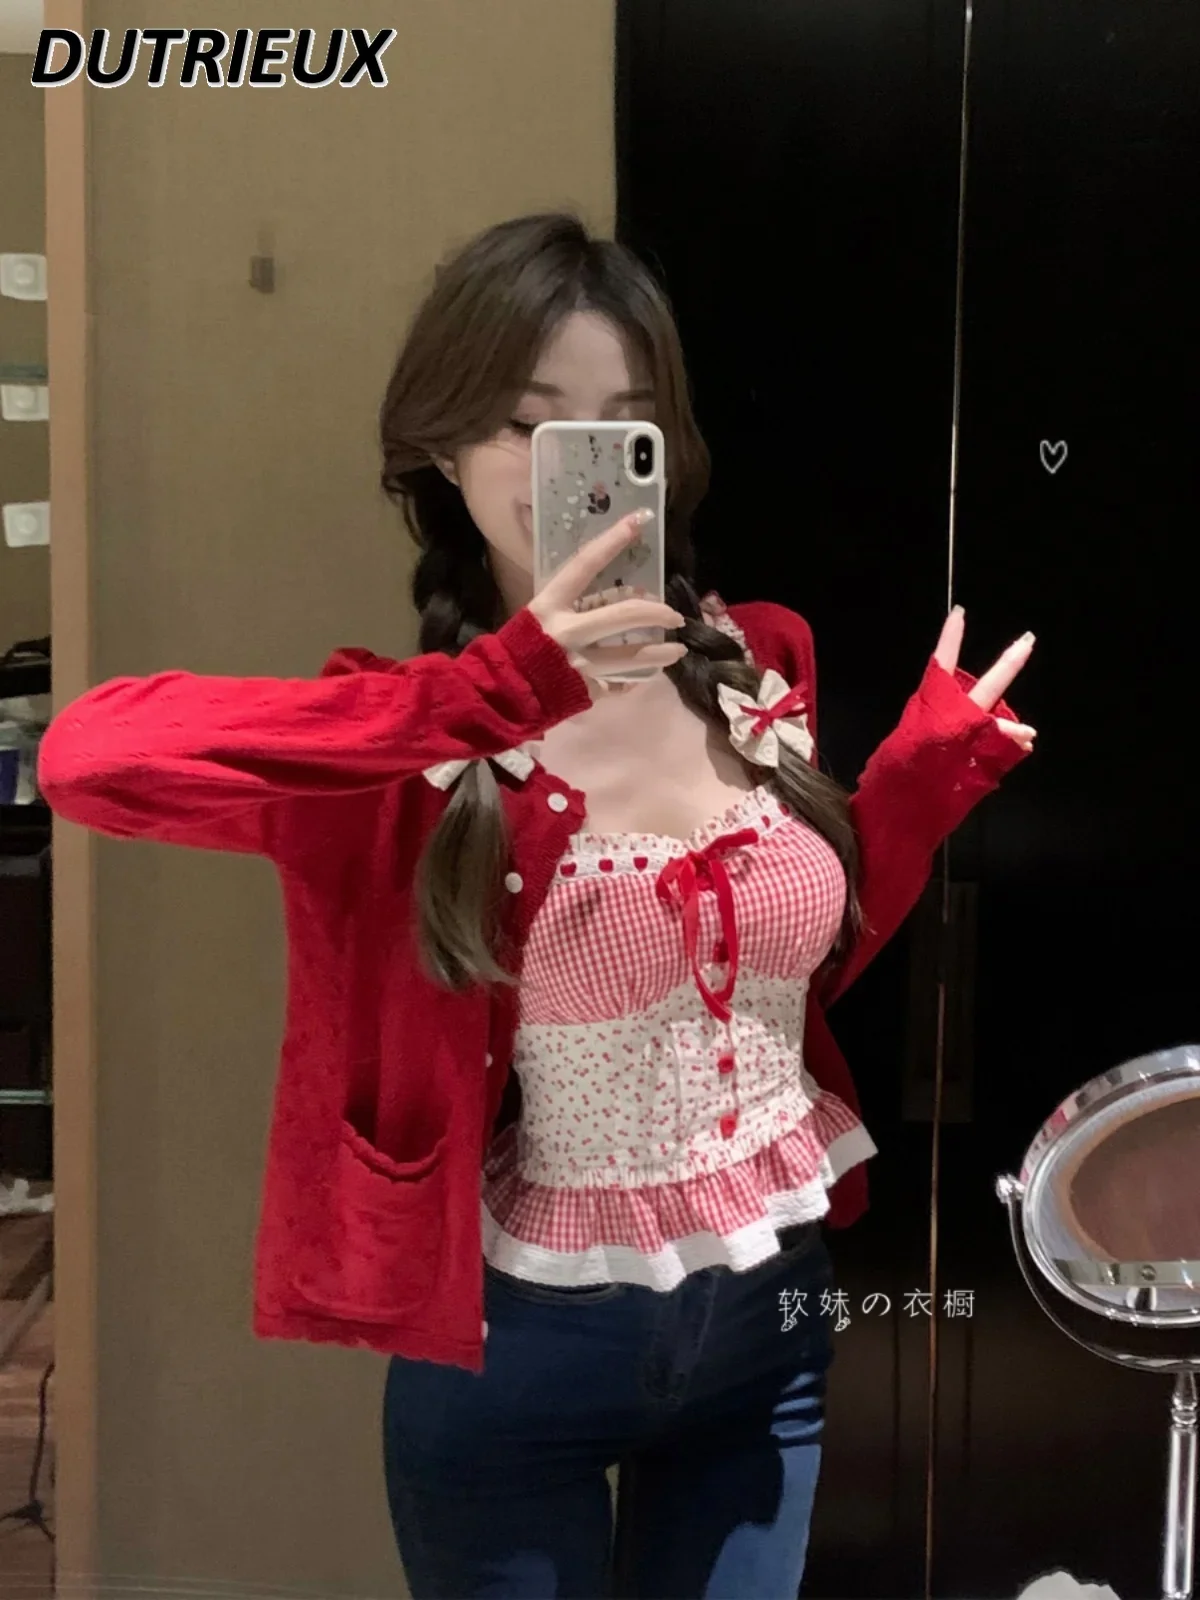 

Sweet Girls Polka Dot Print Outerwear Camisole Crop Top Red Long Sleeve Single-Breasted Knitted Cardigan Coat for Women